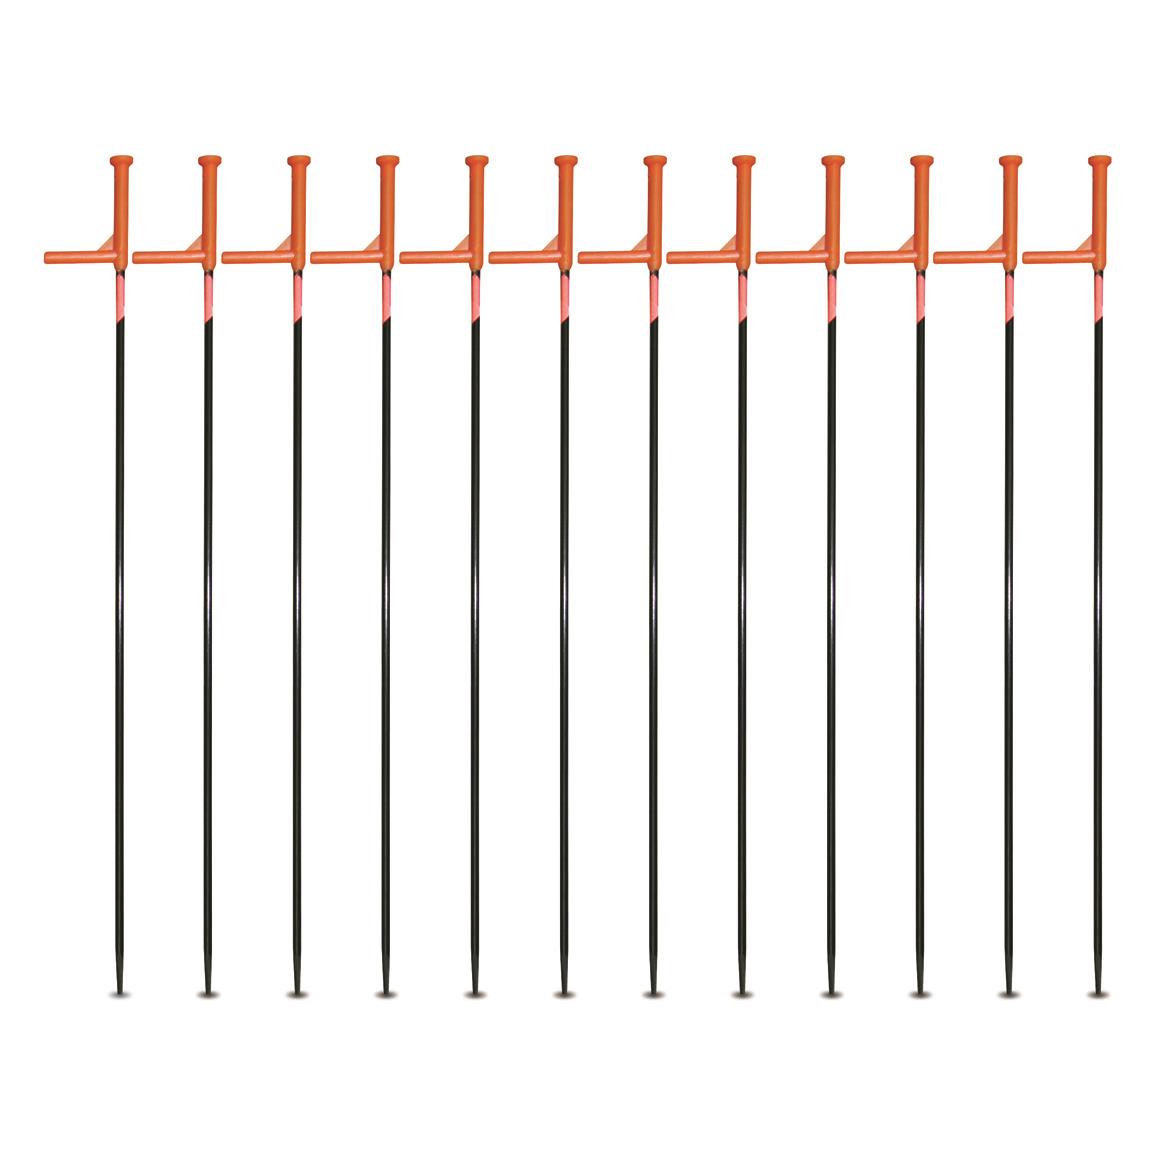 Avery GHG Realmotion Field Stakes, 12 Pack